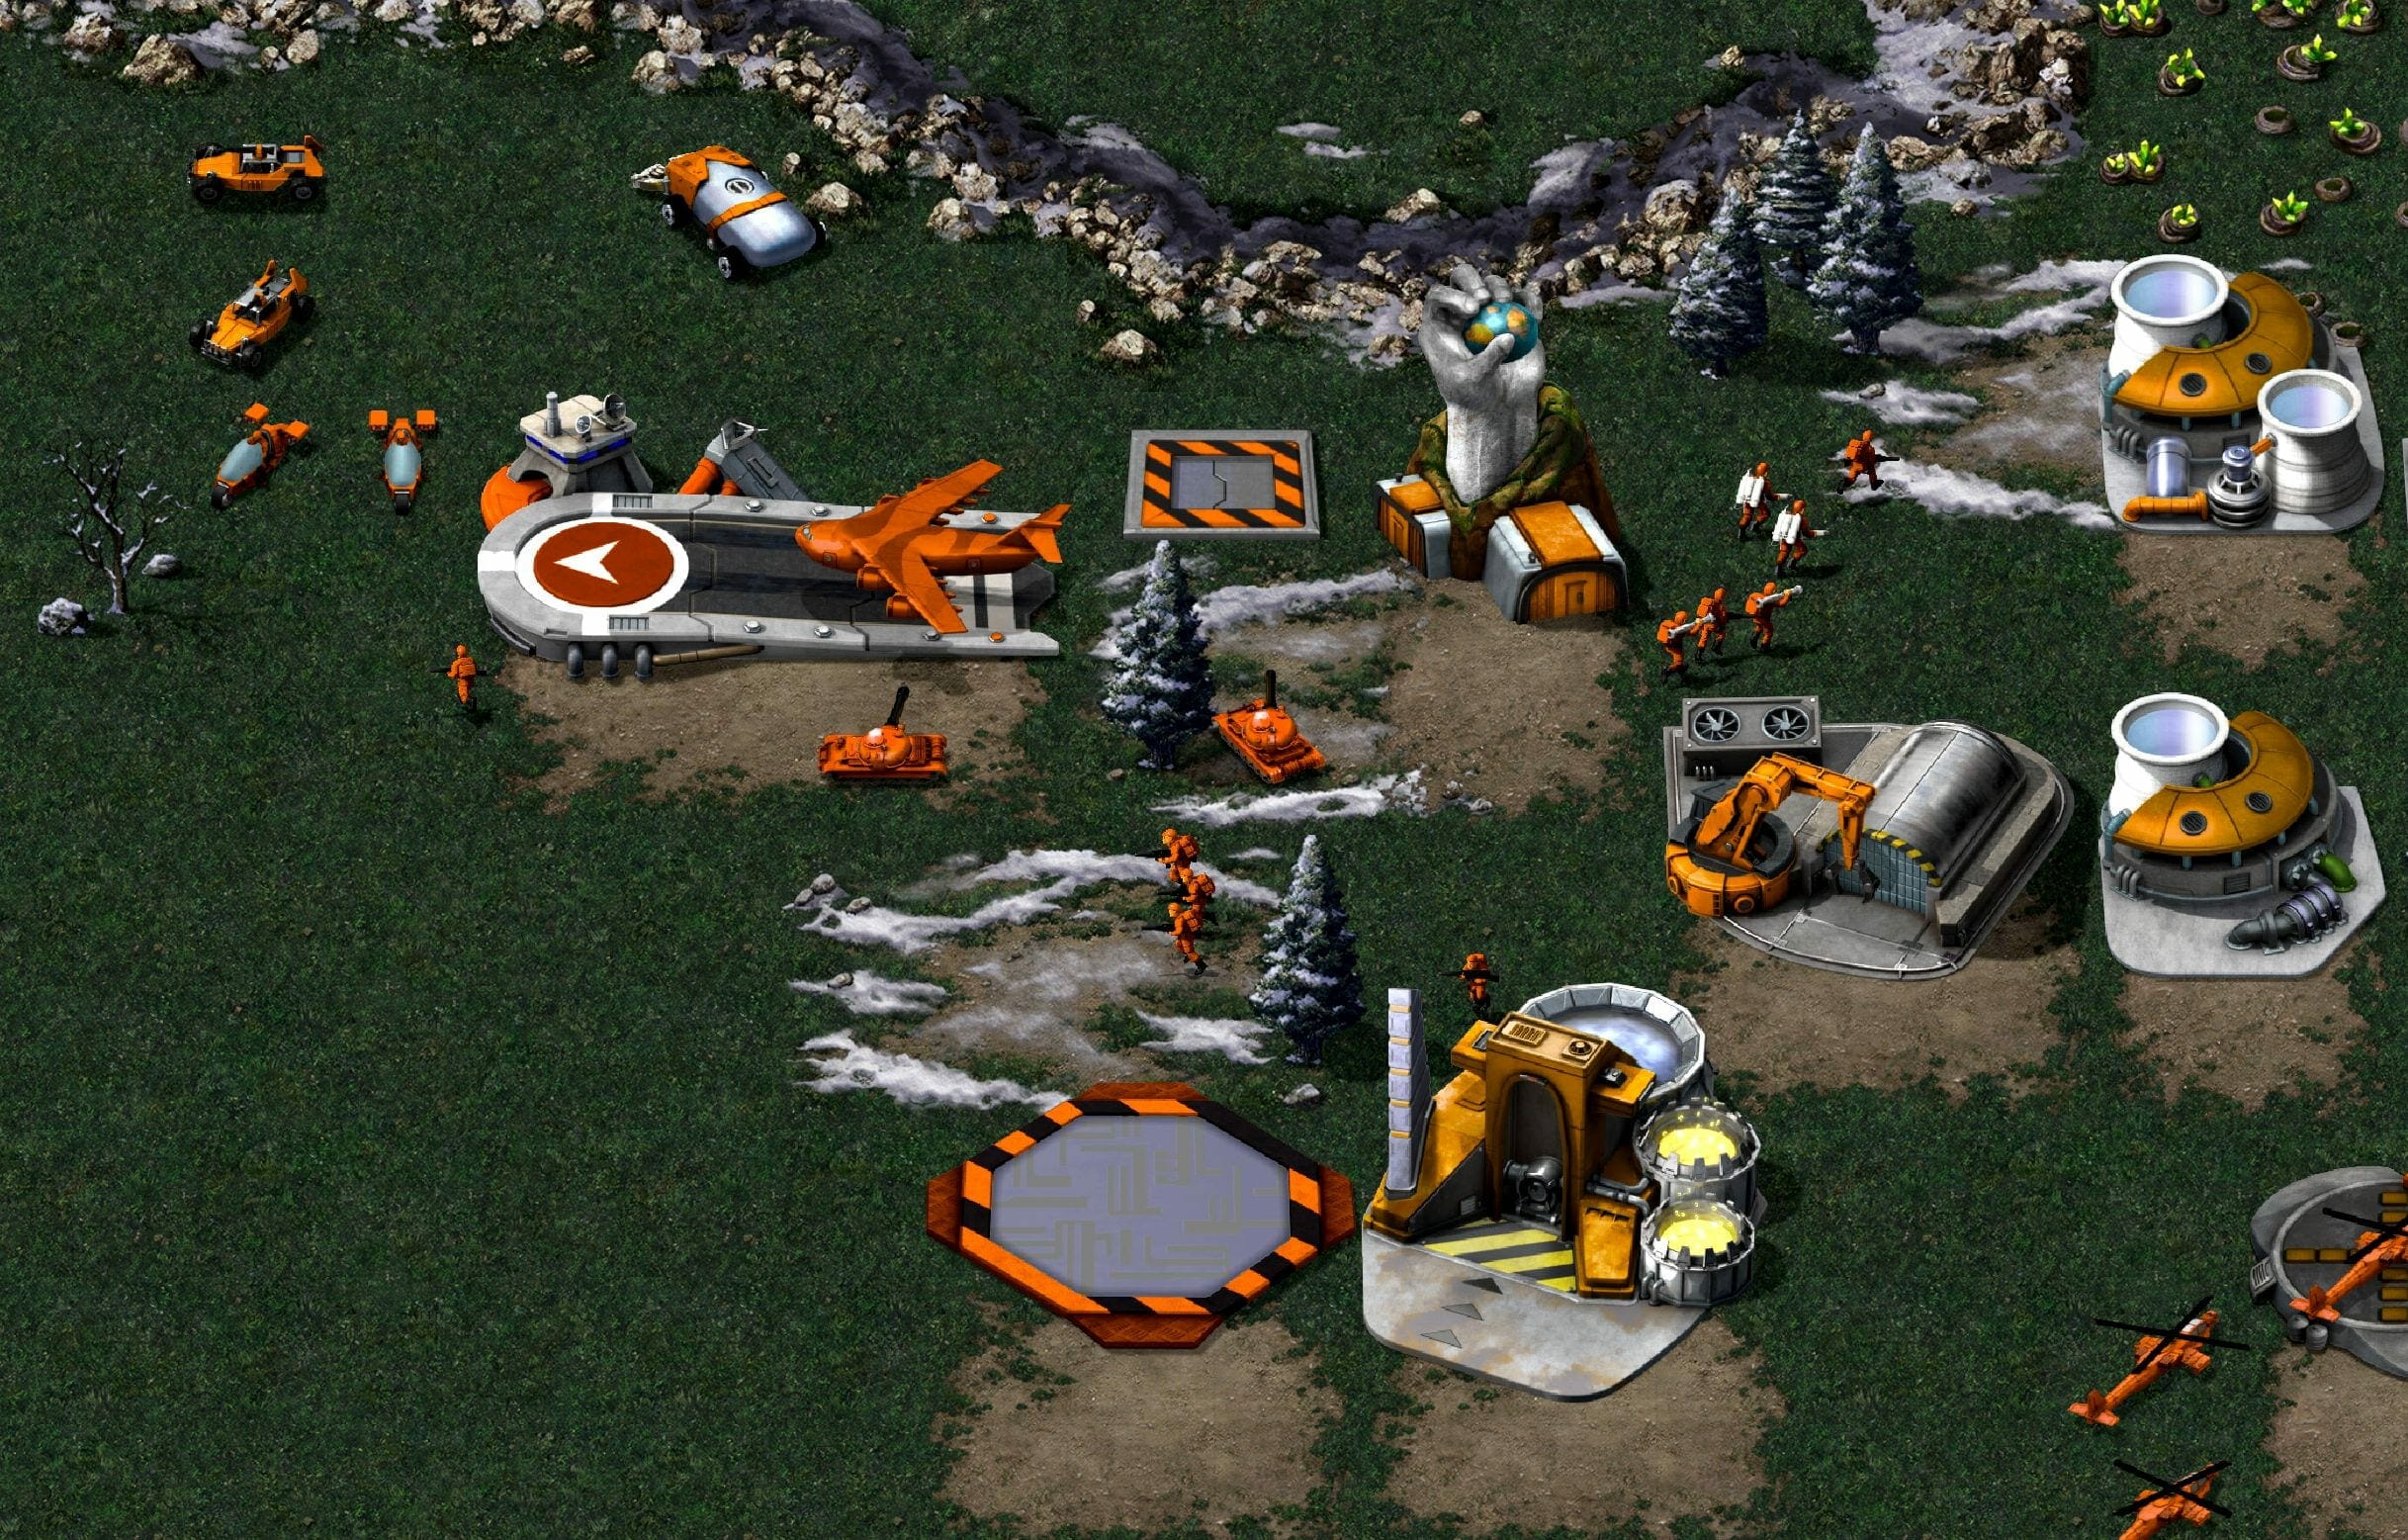 command and conquer free on steam